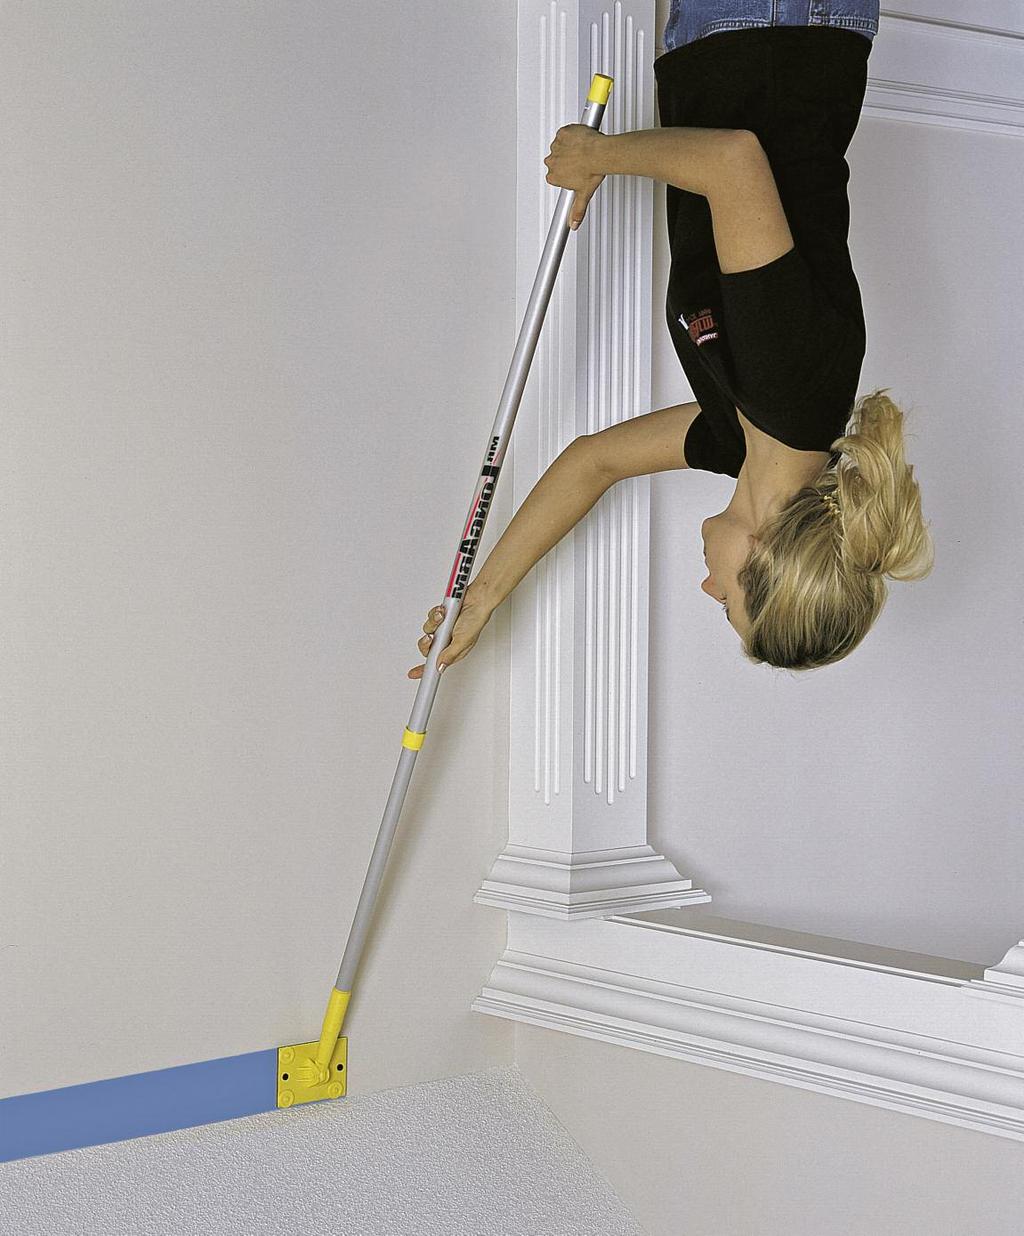 twist-lok EXTENSION POLES multi-use. Twist-Lok is our lightest extension pole, perfect for around-thehome tasks like painting, dusting and window cleaning.